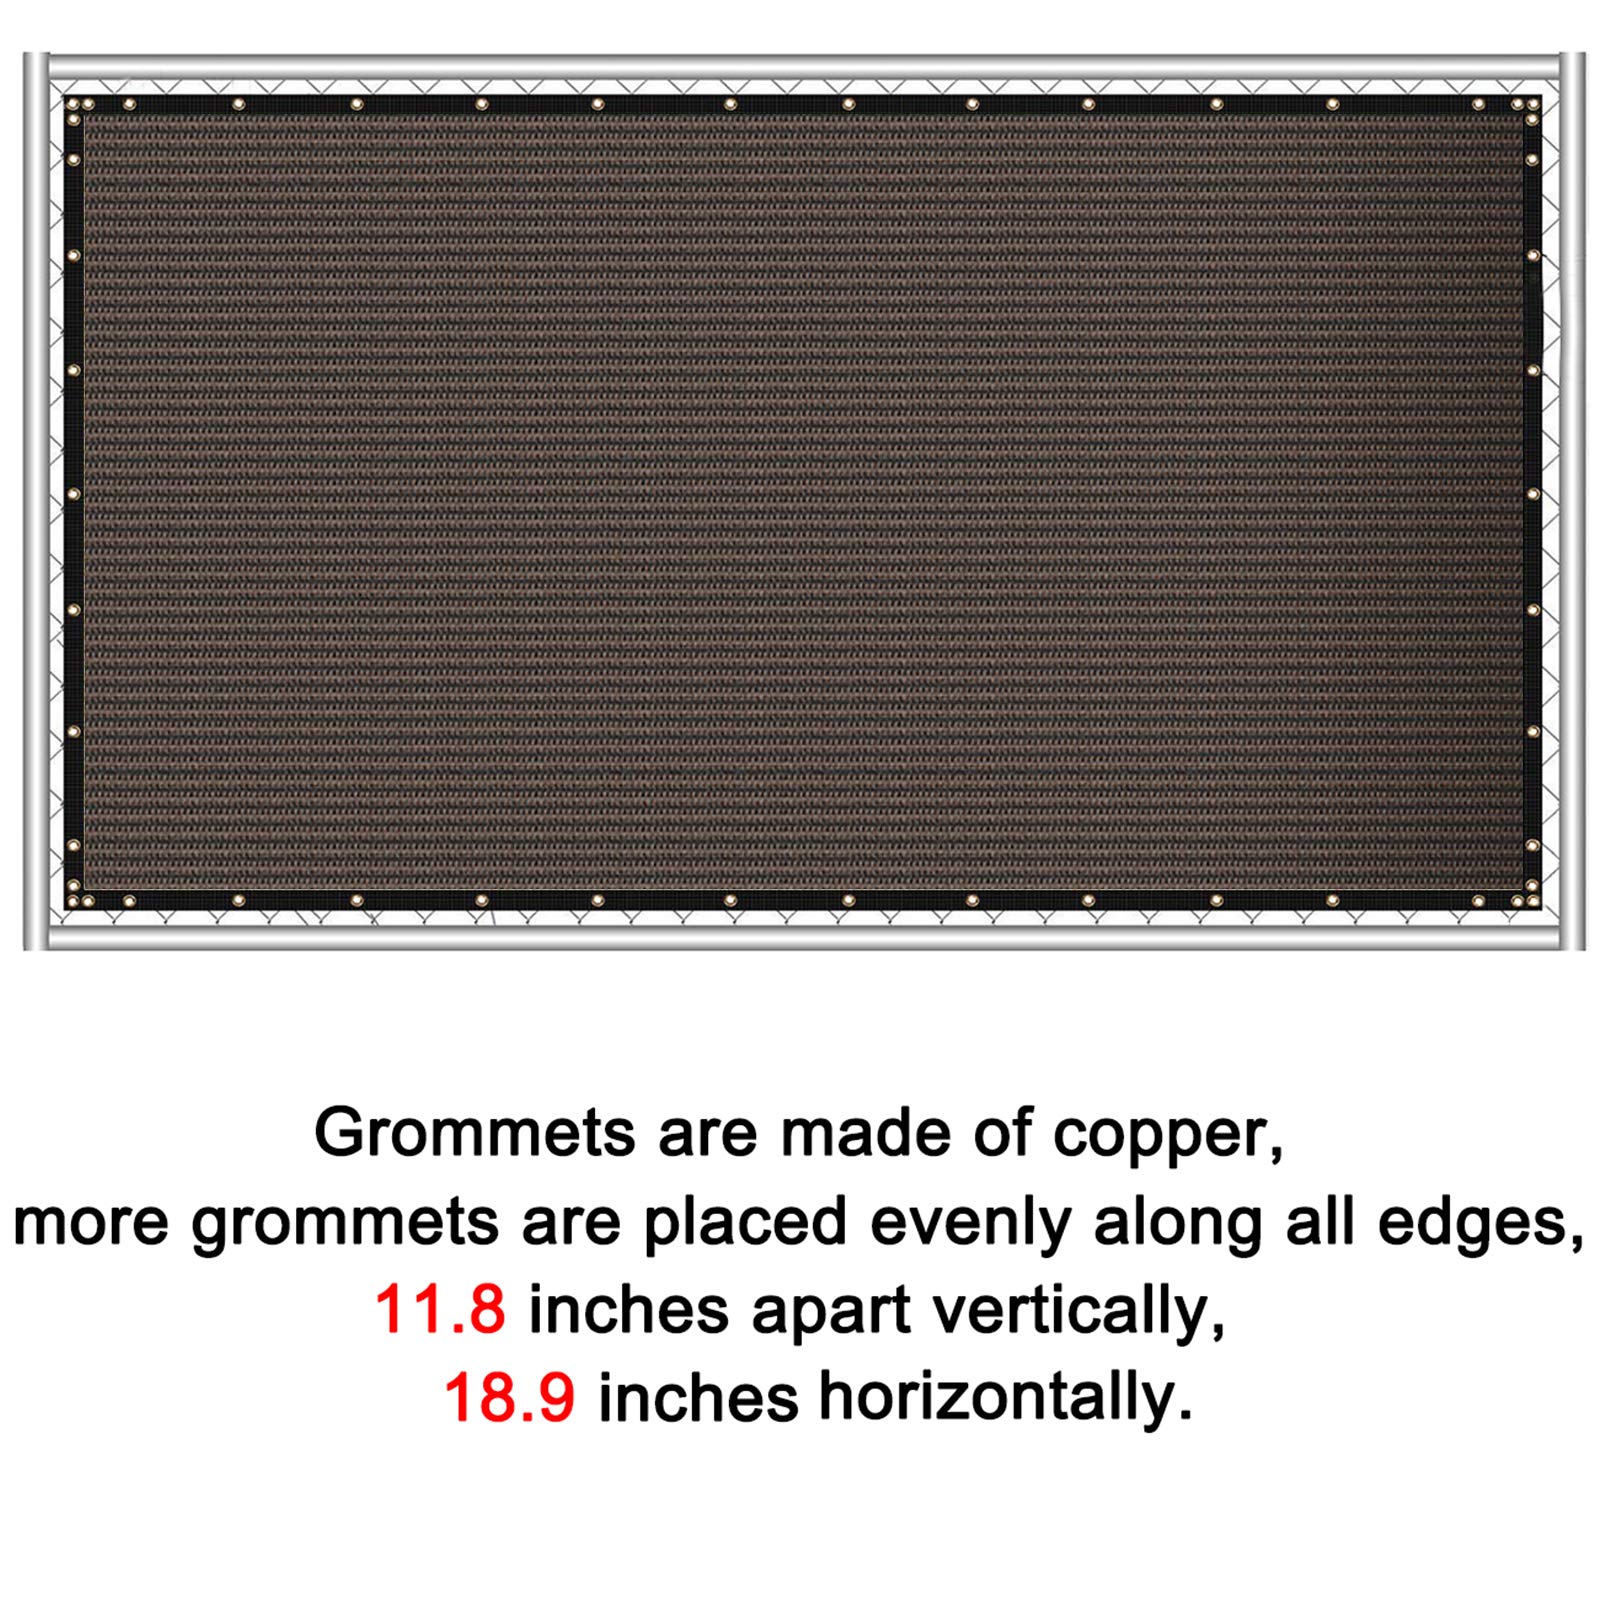 Sunnyglade 6 feet x 50 feet Privacy Screen Fence Heavy Duty Fencing Mesh Shade Net Cover for Wall Garden Yard Backyard (6 ft X 50 ft, Brown)